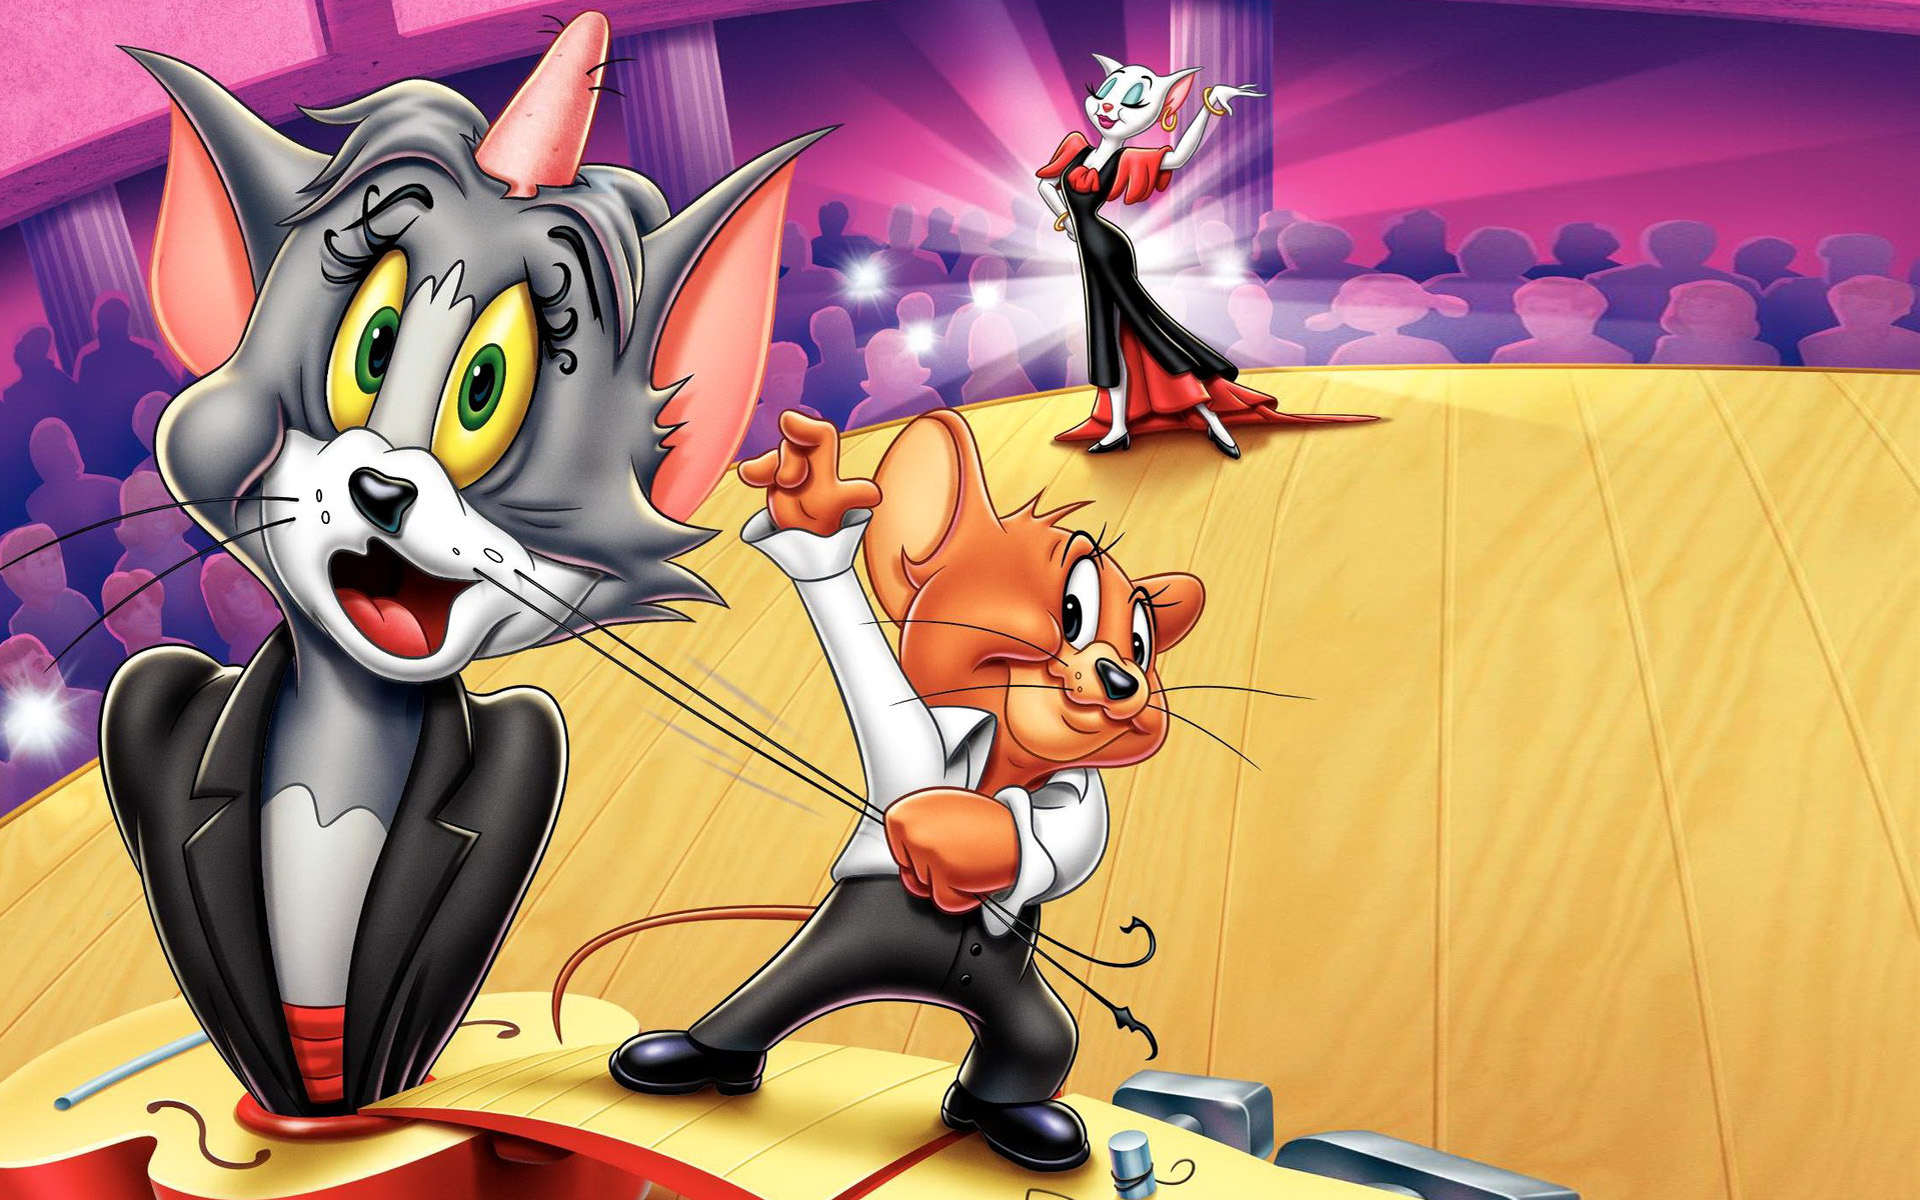 Tom And Jerry Magic Show Wallpapers Hd 1920x1200 : Wallpapers13.